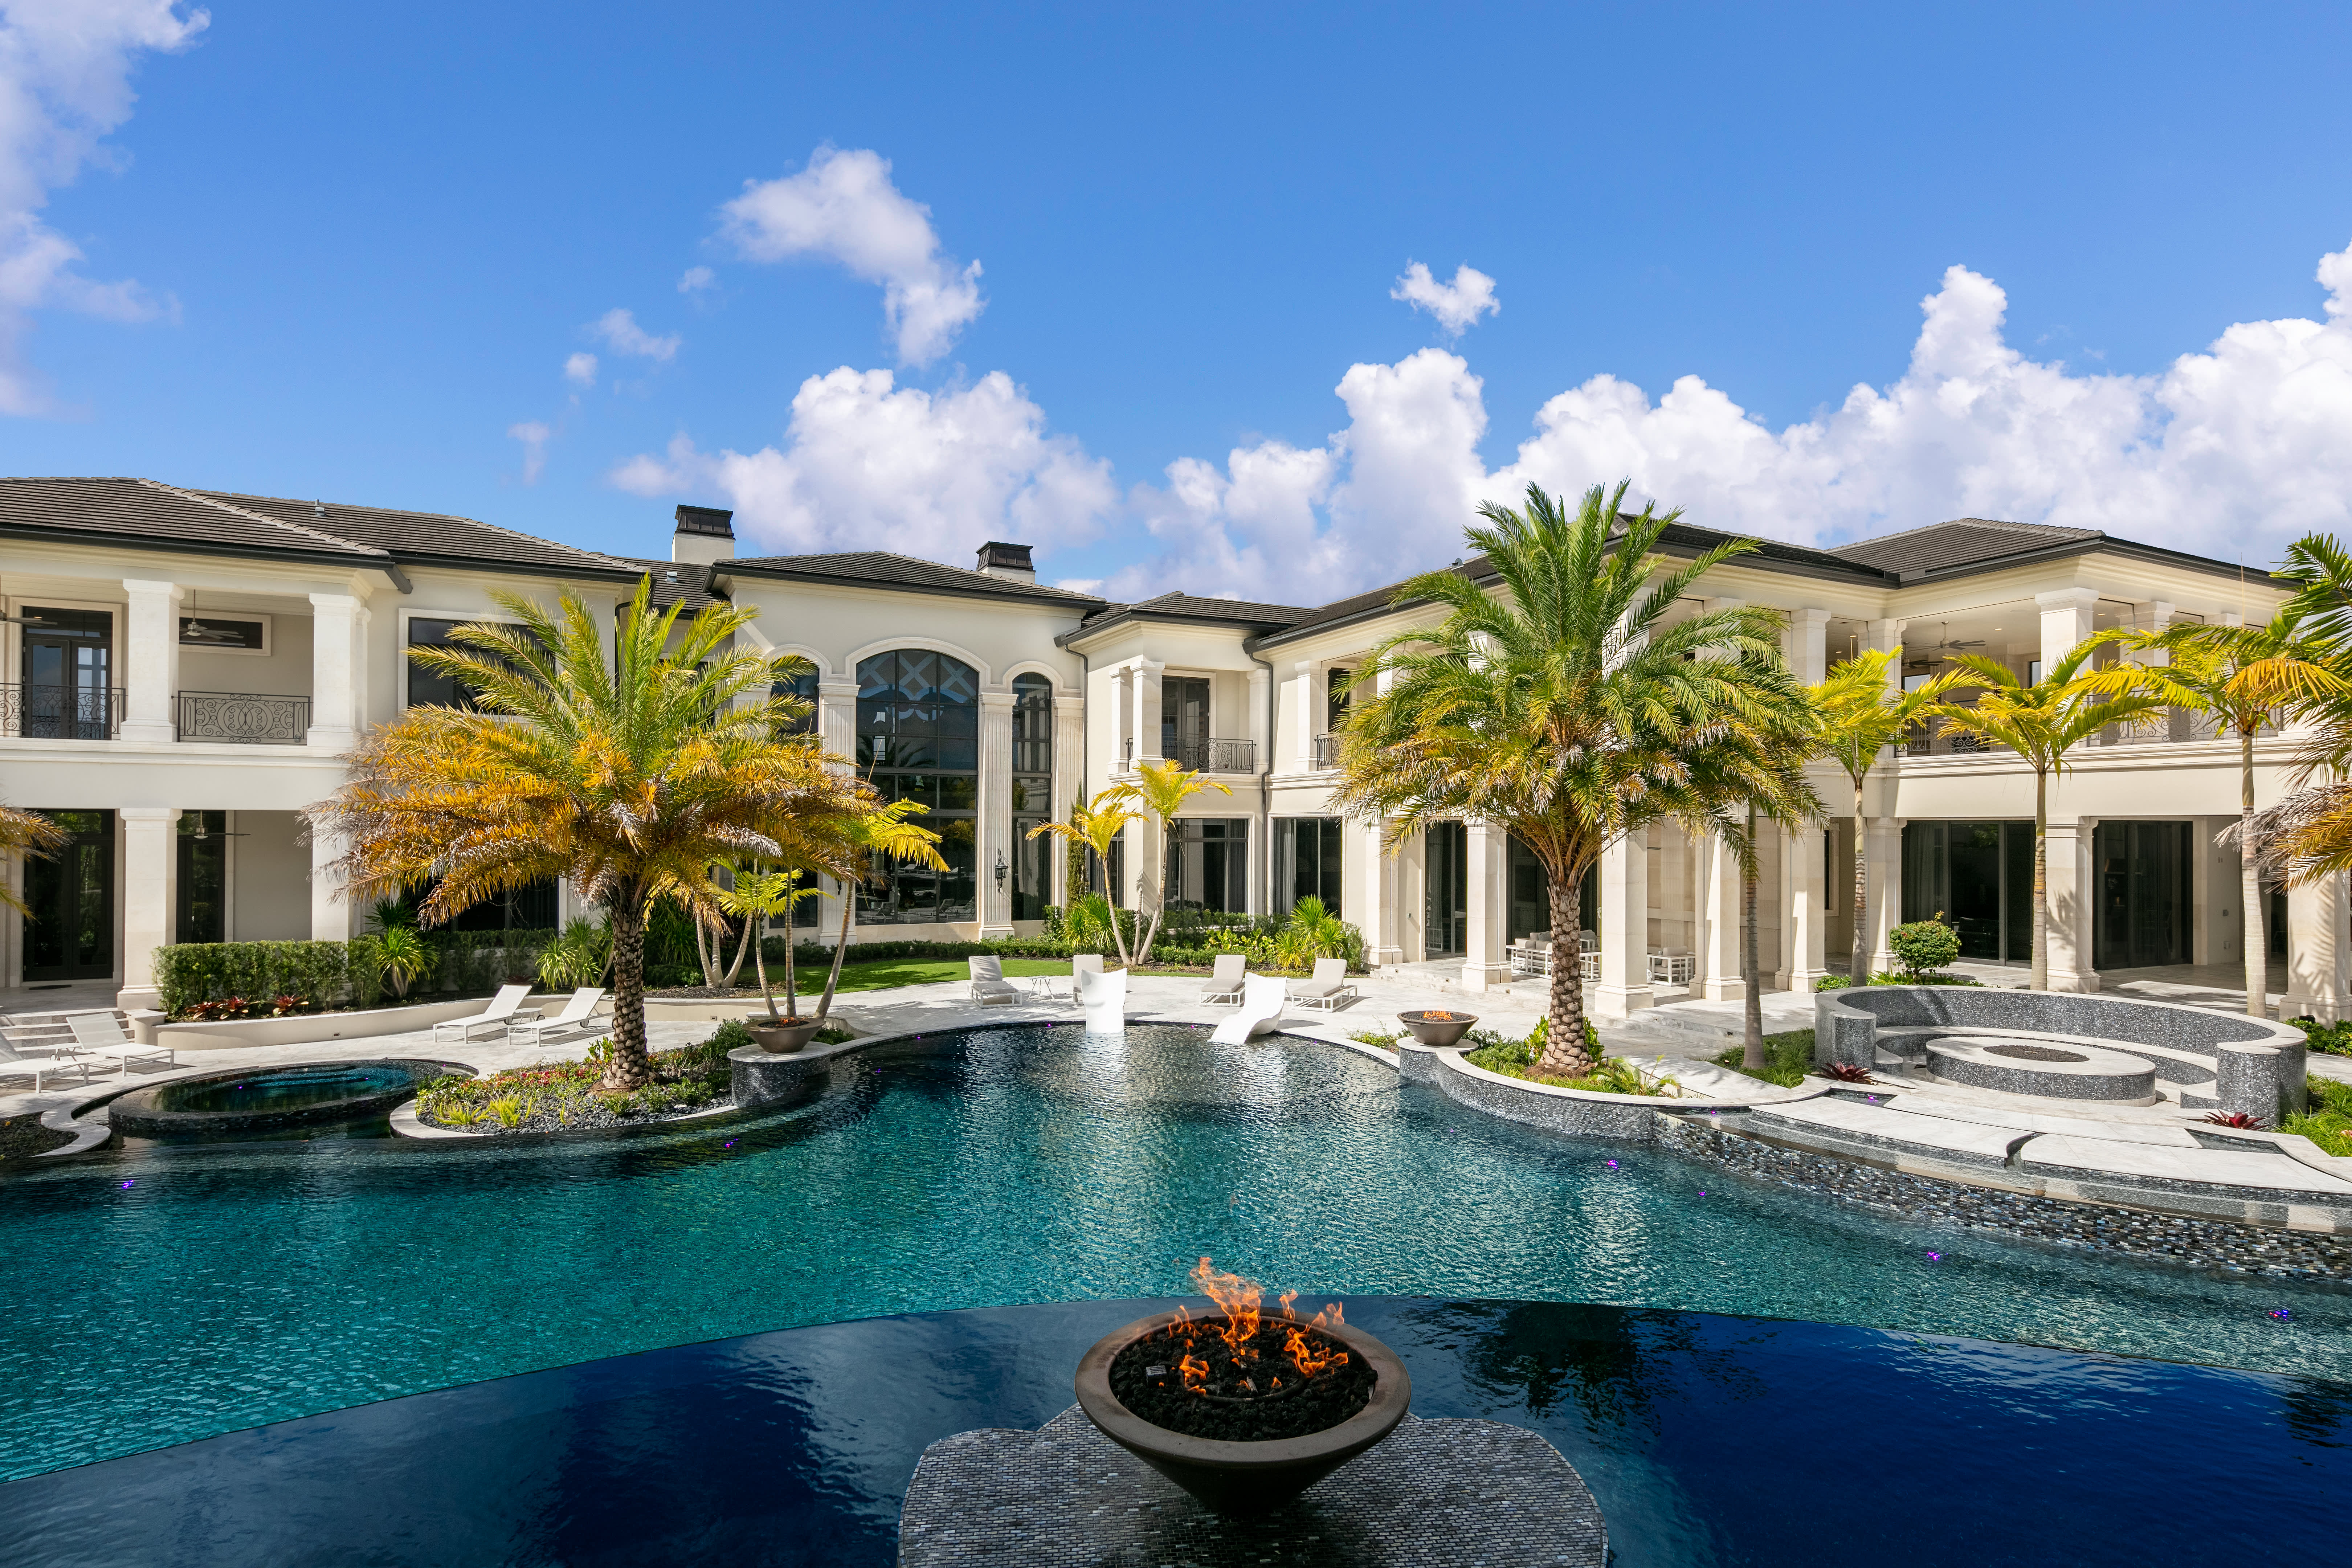 $ 19 million mansion for sale in Delray Beach, setting new local home sales record